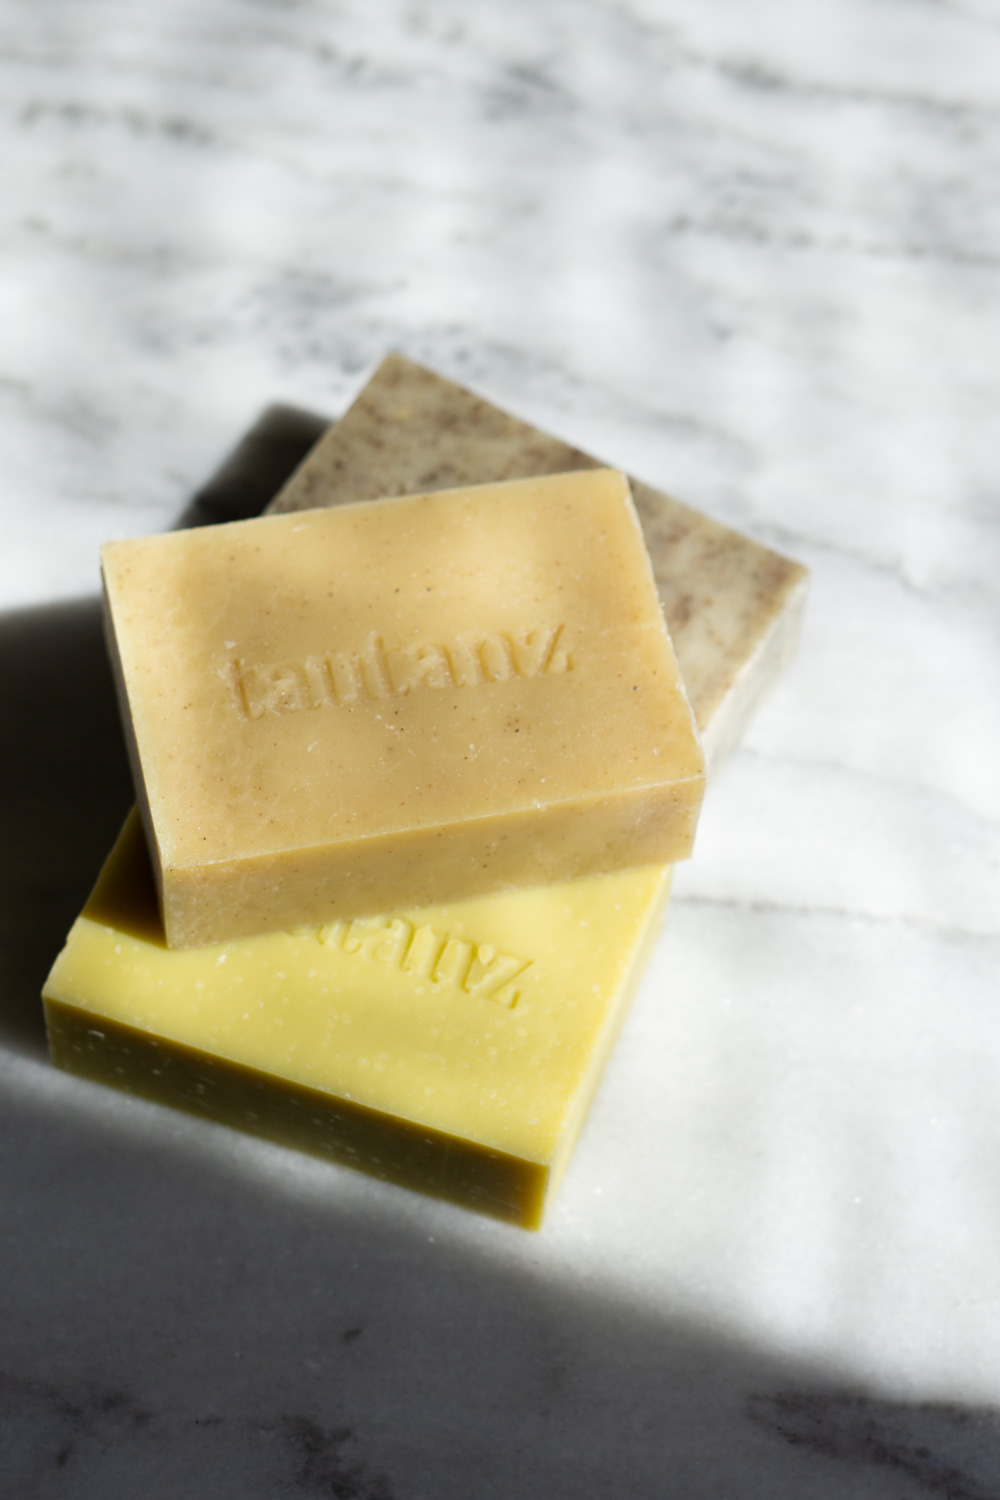 Tautanz Luxury Beauty - Handmade Soap - Natural Skincare - Slow Living - Sustainable Cosmetics - Product Photography - Natural Skin